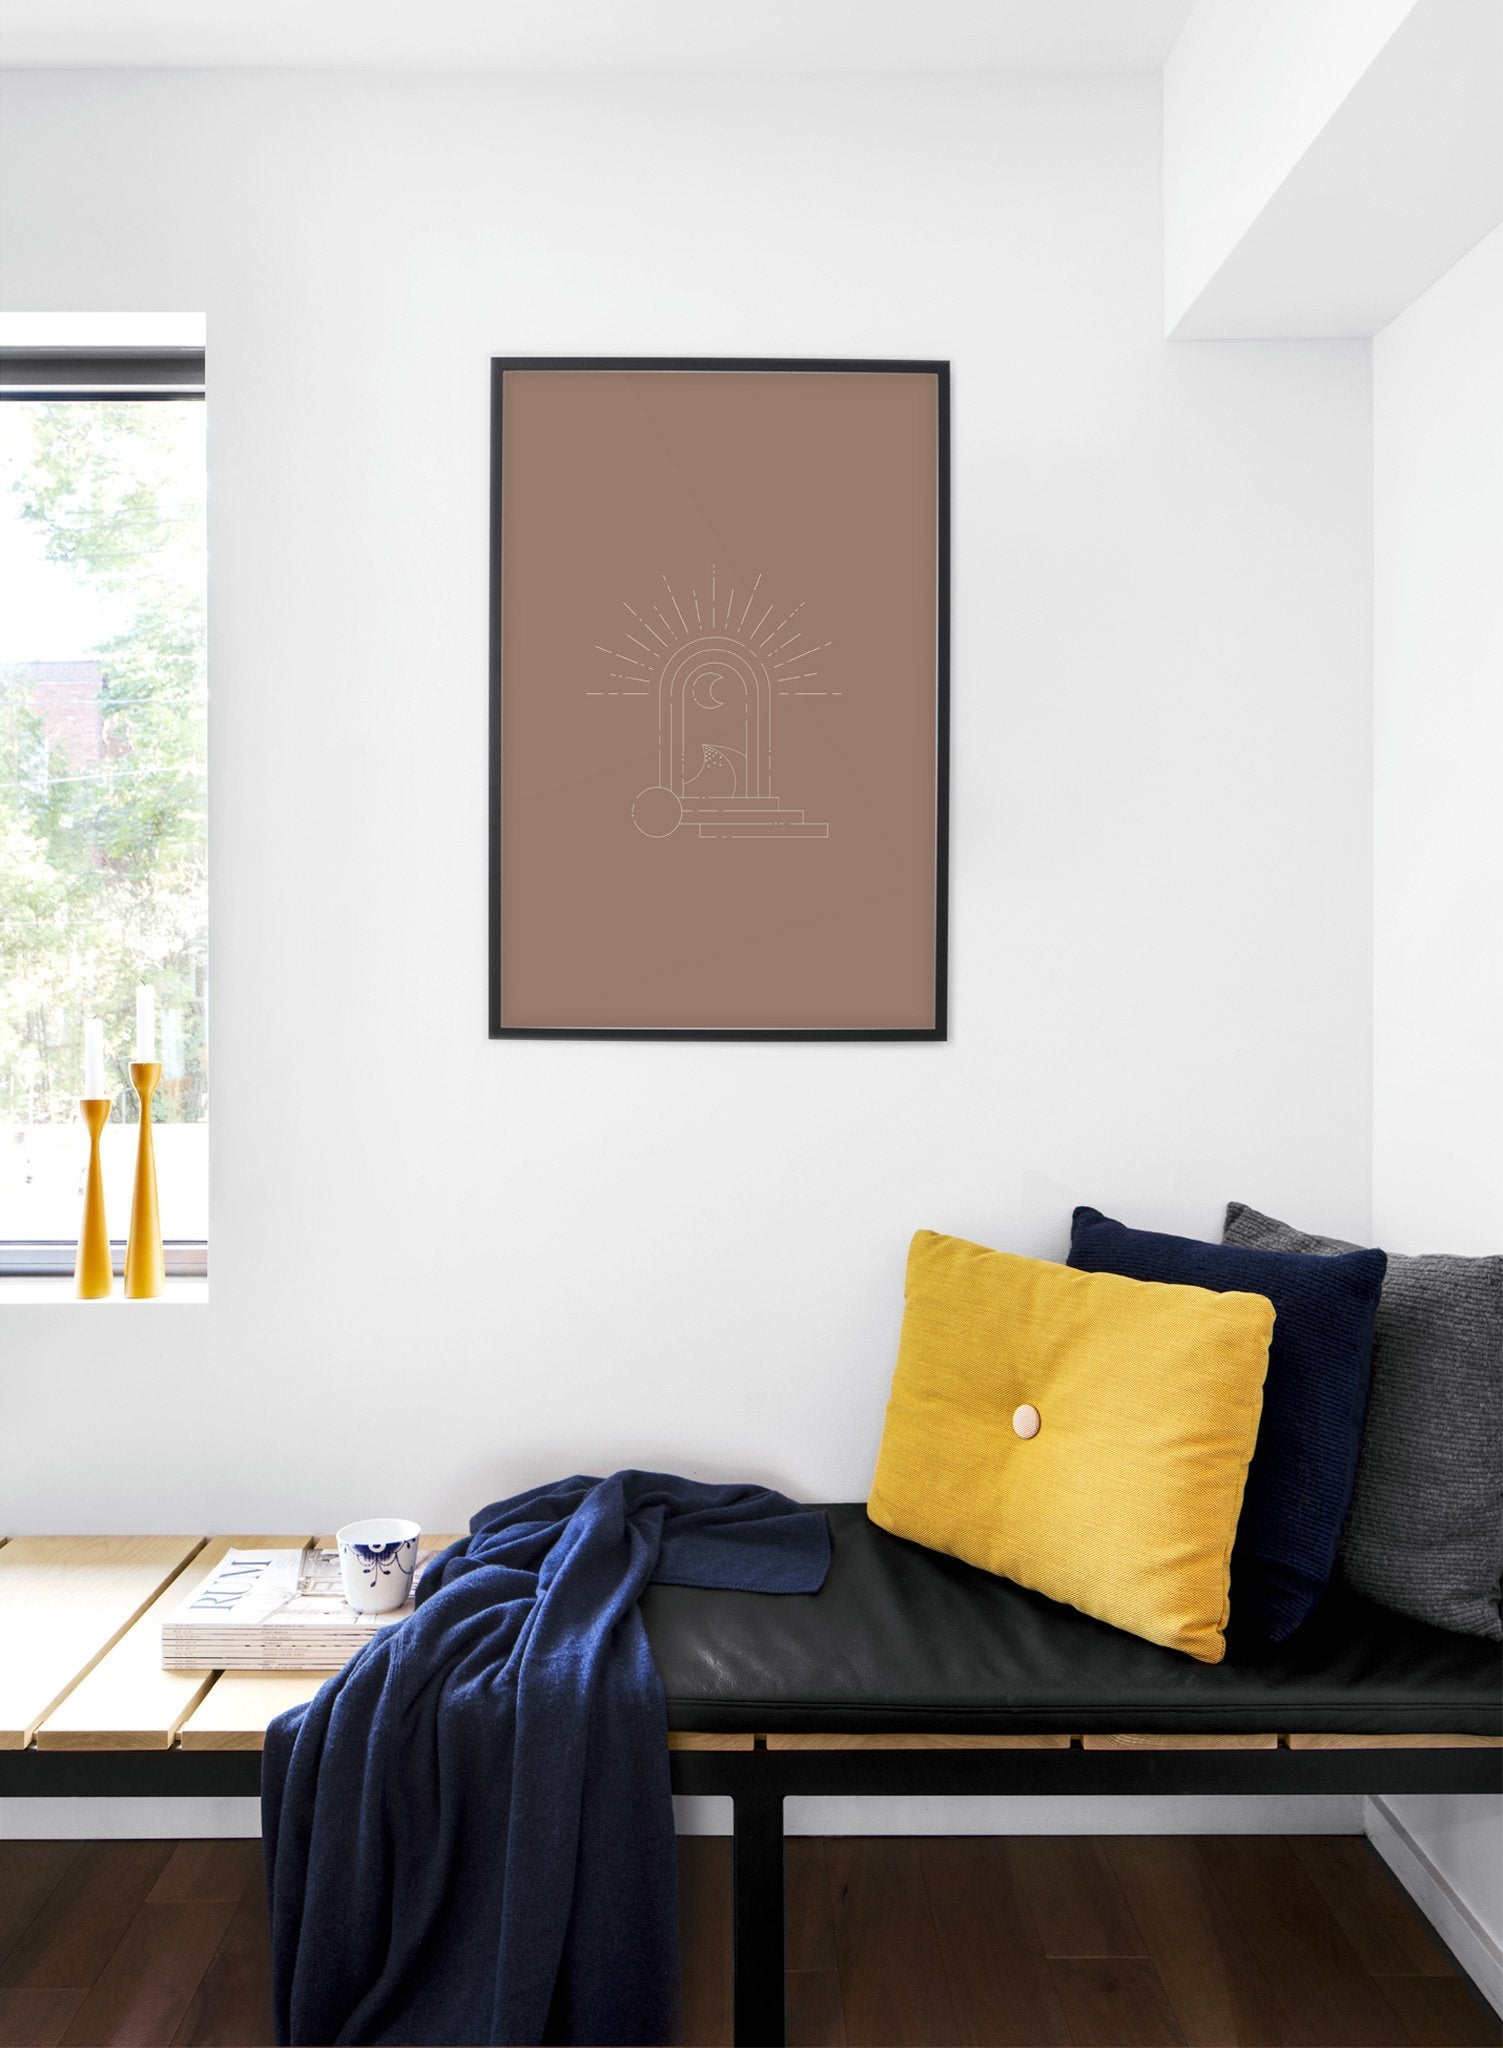 Take Me To The Moon modern minimalist abstract design poster by Opposite Wall - Bedroom